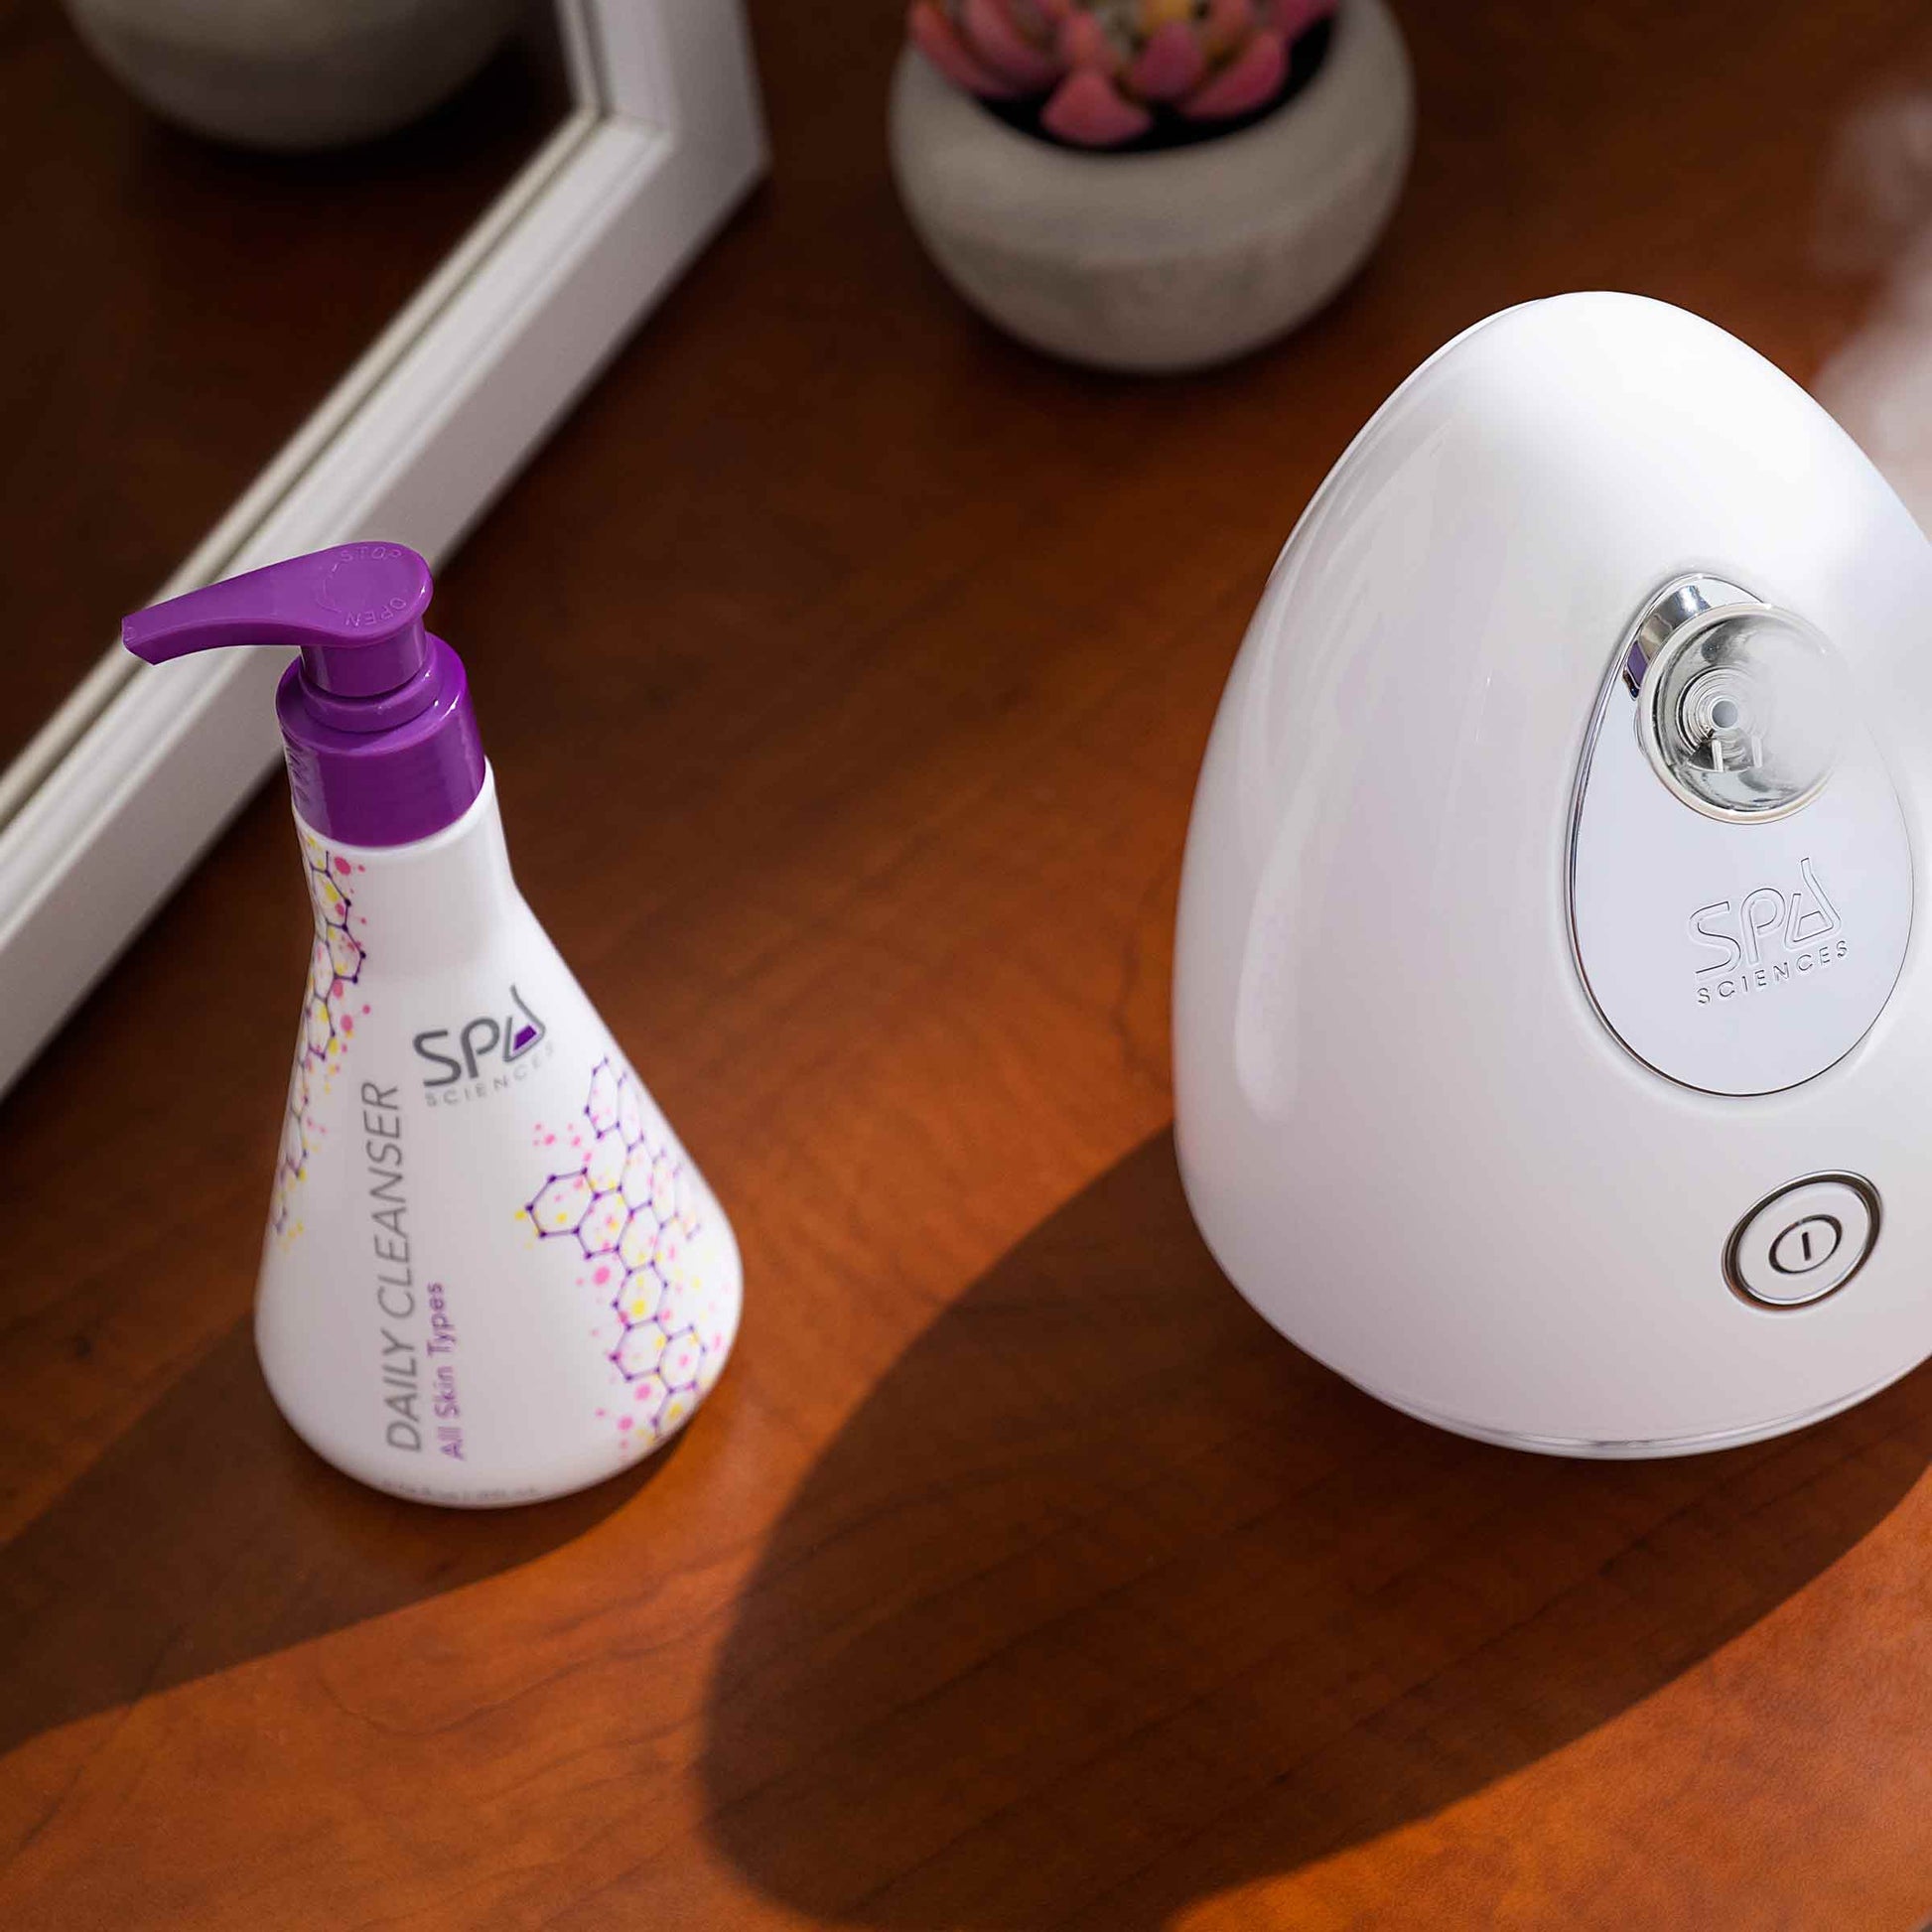 A hydrating humidifier next to a Spa Sciences Daily Cleanser helps cleanse the skin and remove impurities.